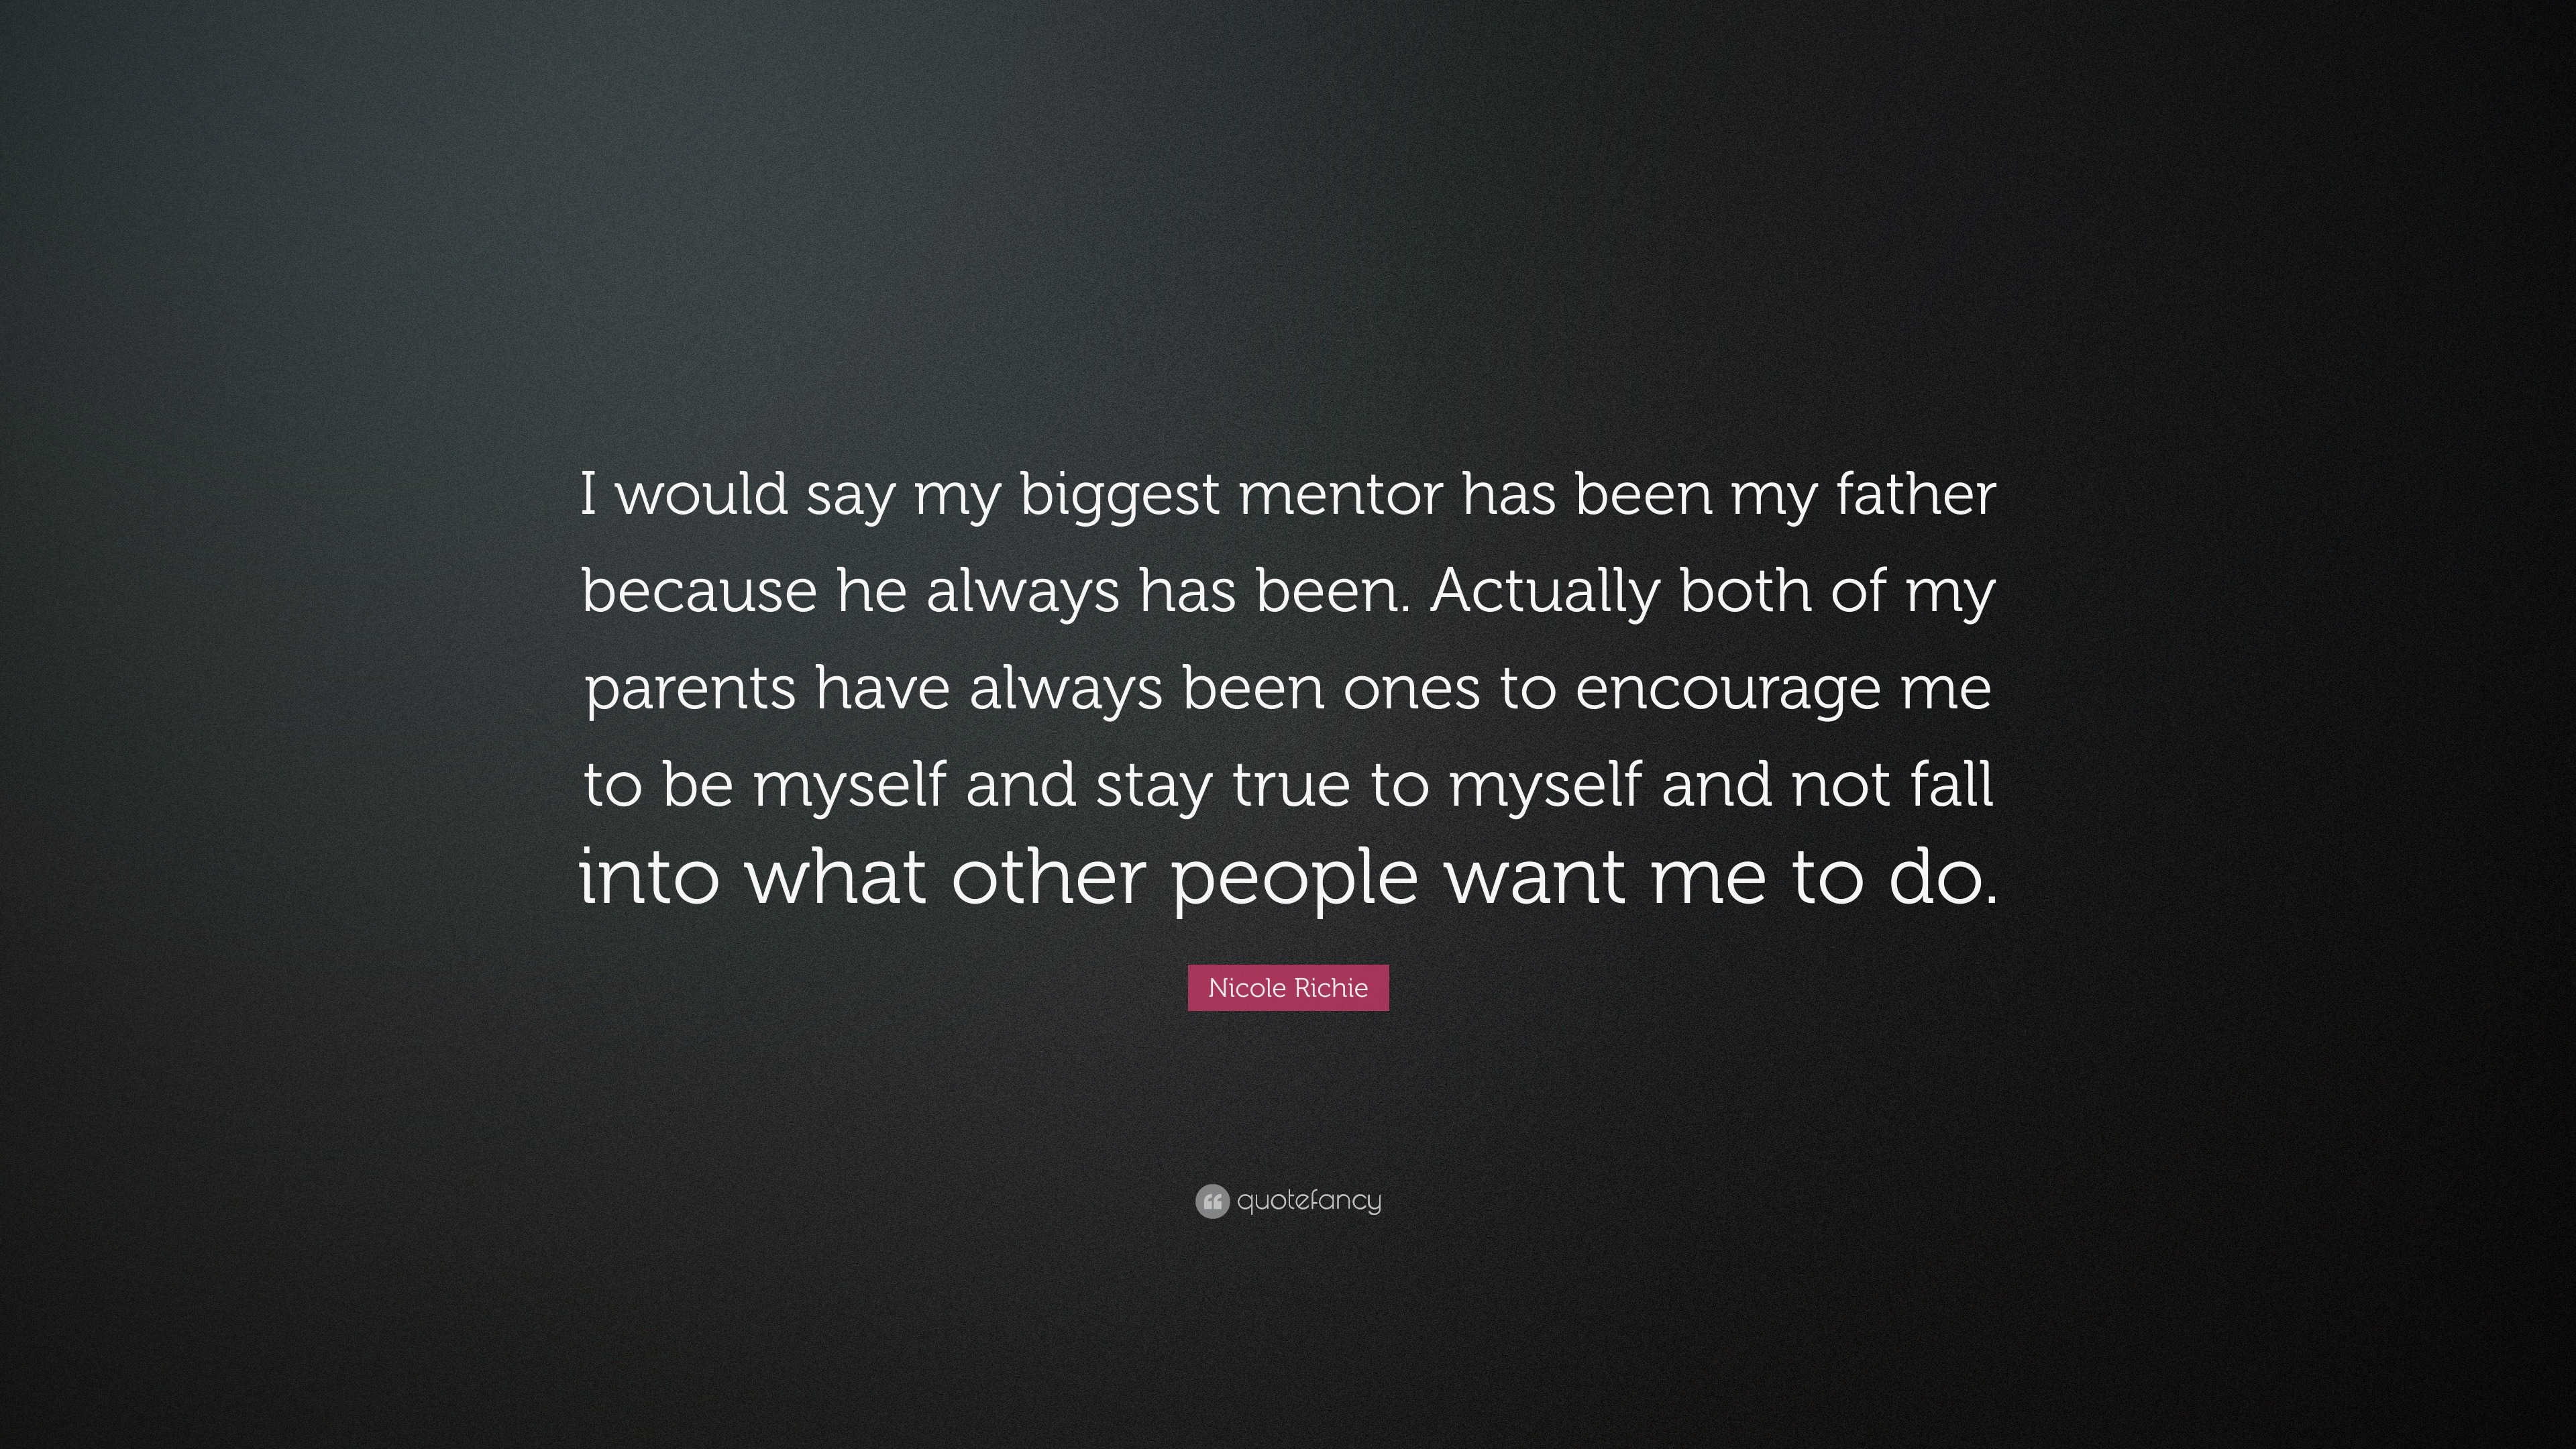 Nicole Richie “I would say biggest mentor my father because he always has been. Actually both of my parents have always bee...”